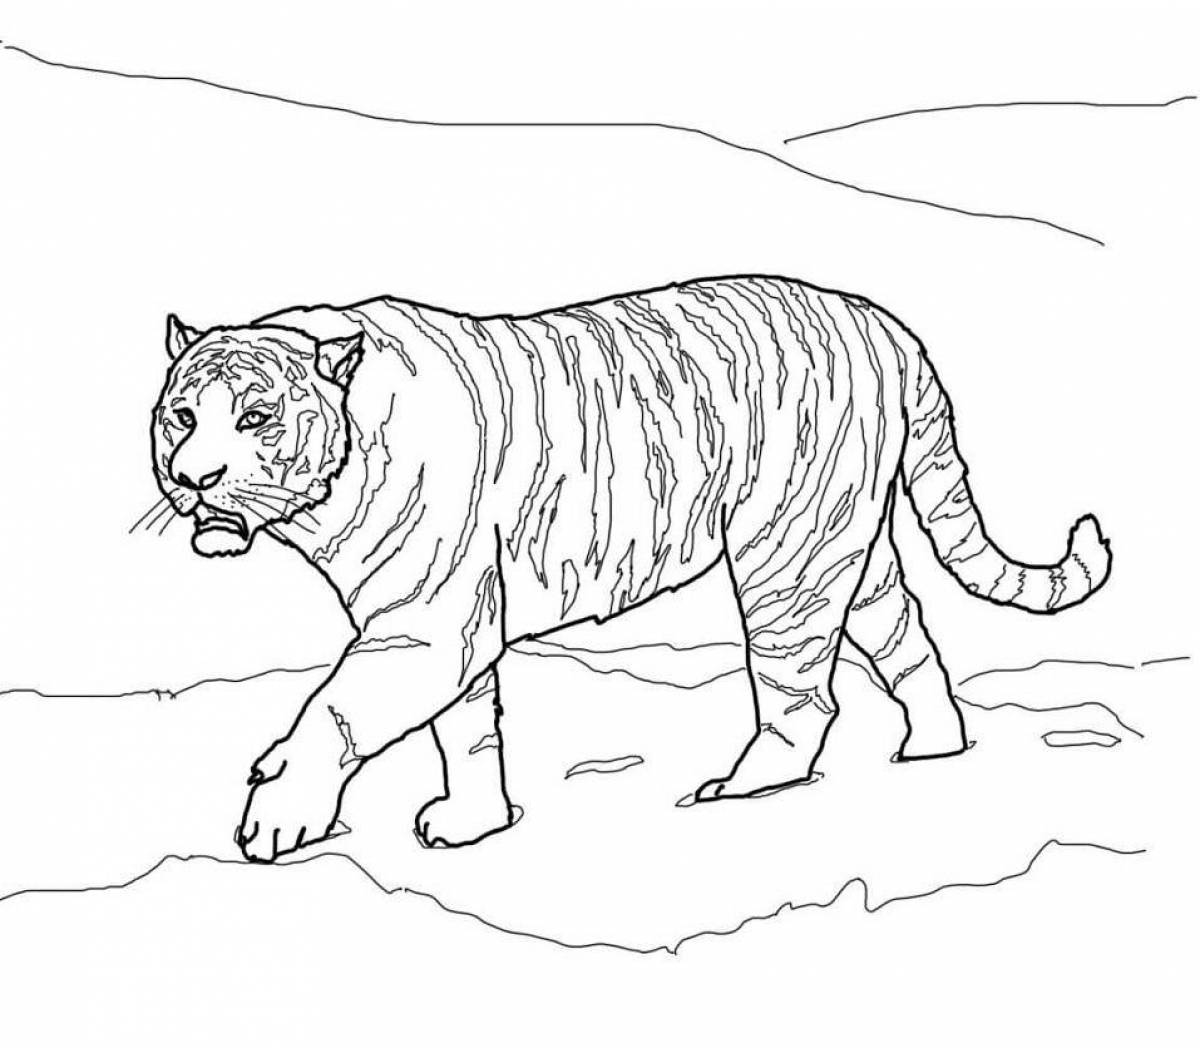 Fat tiger coloring book for children 6-7 years old